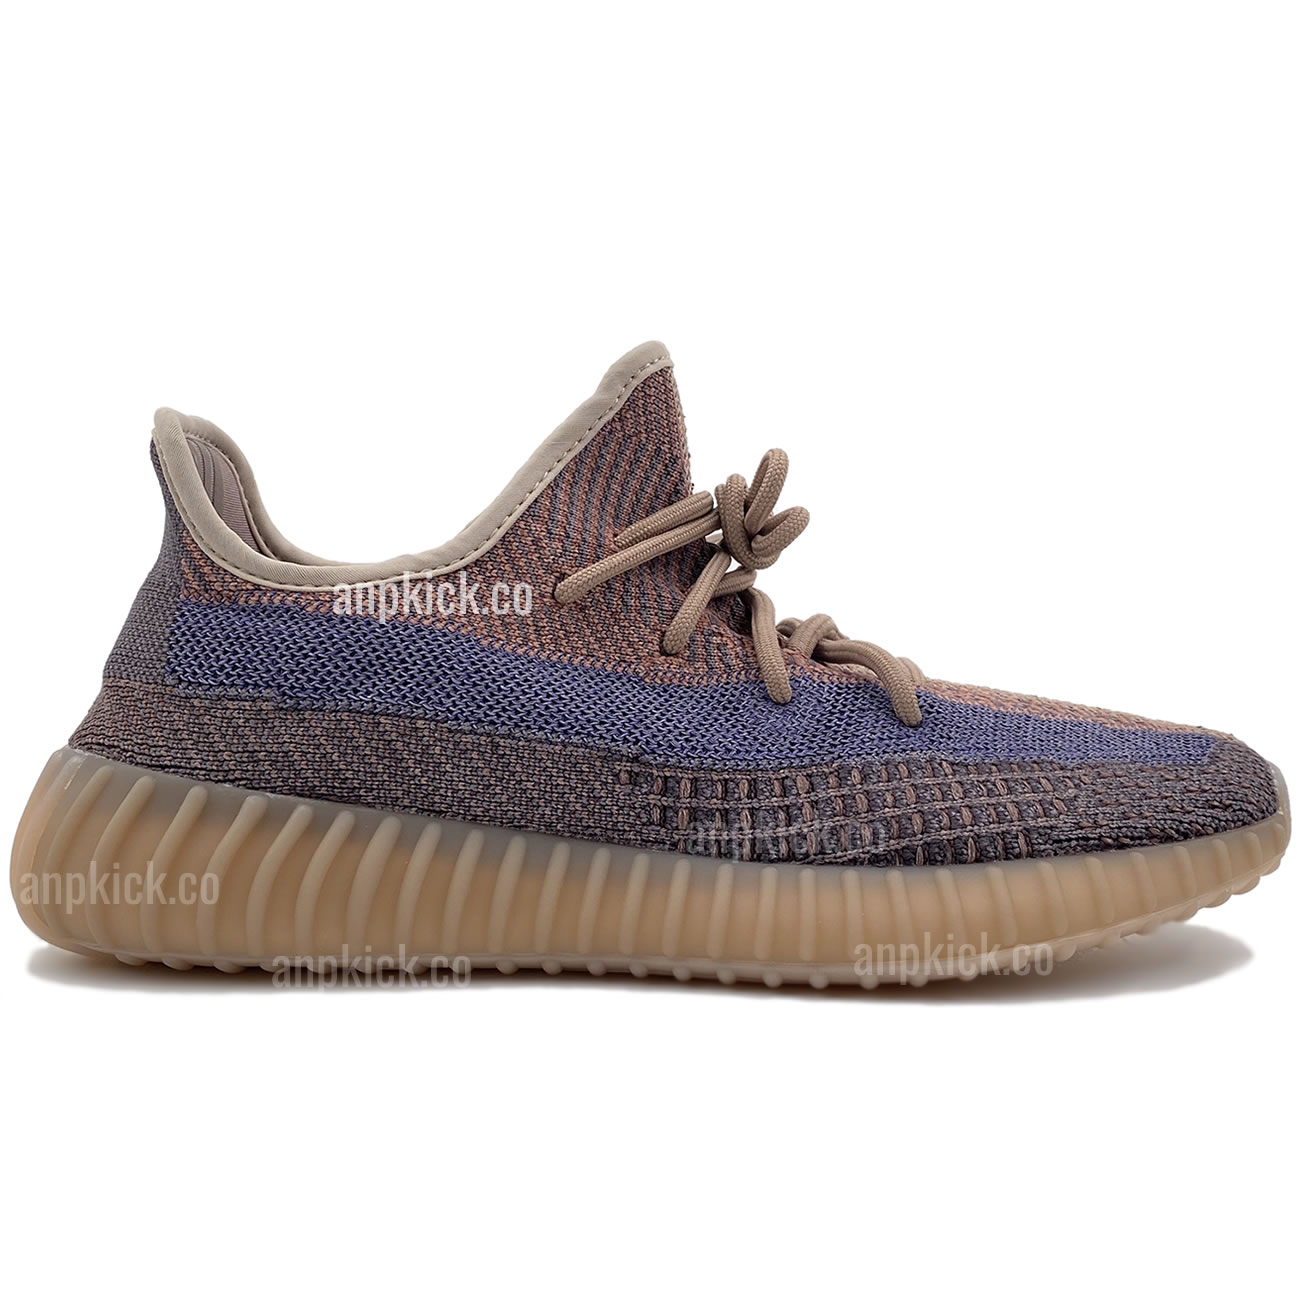 Adidas Yeezy Boost 350 V2 Yecher Ho2795 New Release Date First Look (2) - newkick.org